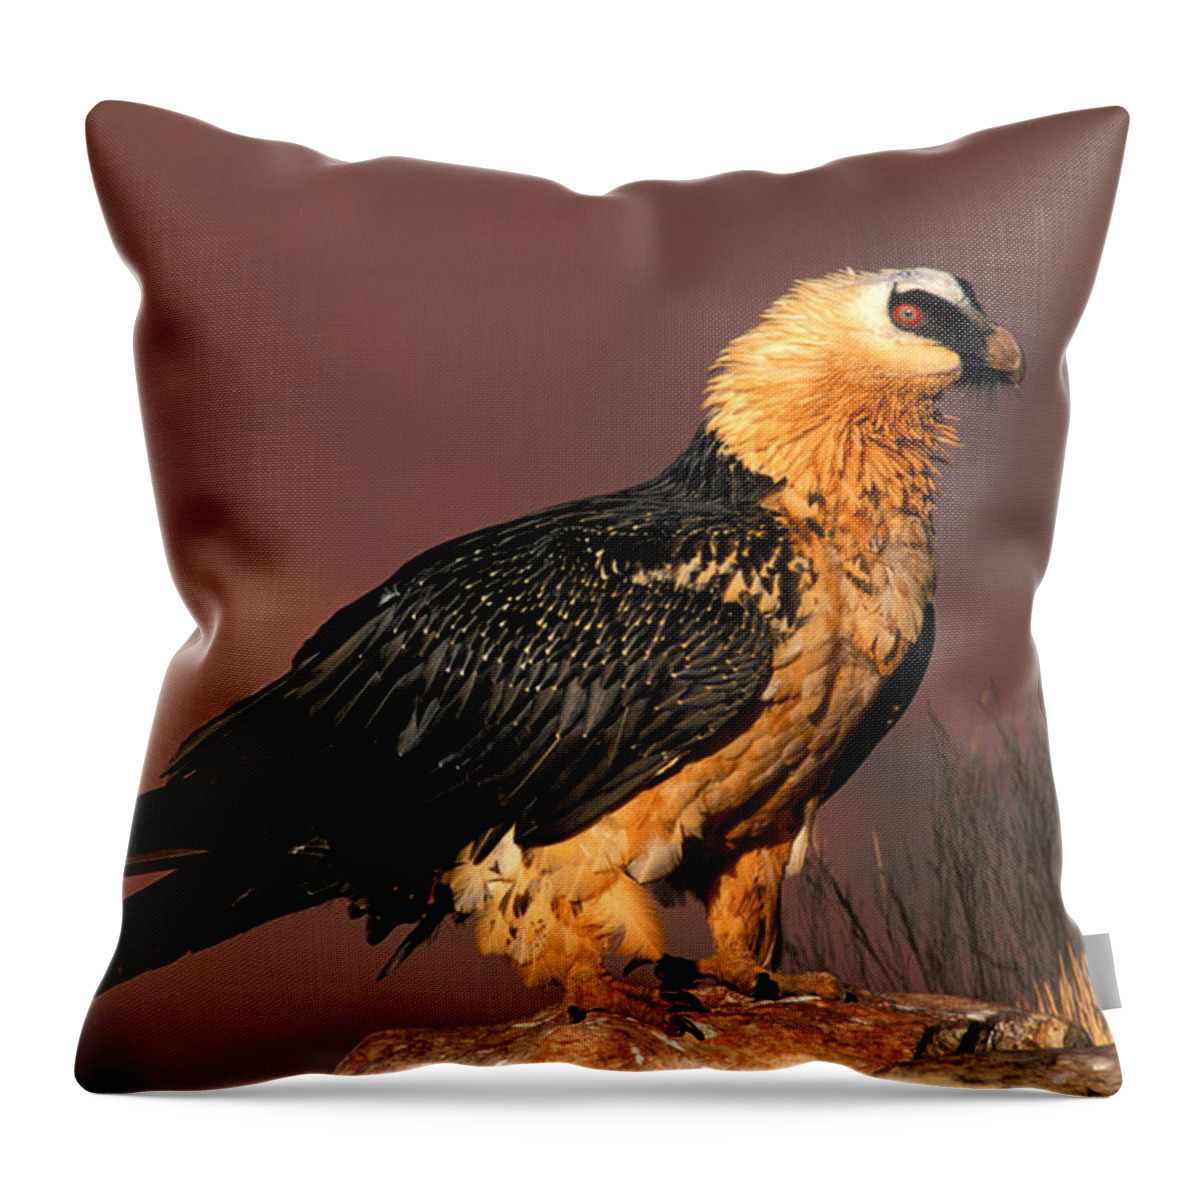 Endangered Throw Pillow featuring the photograph Bearded Vulture Or Lammergeier by Nigel Dennis